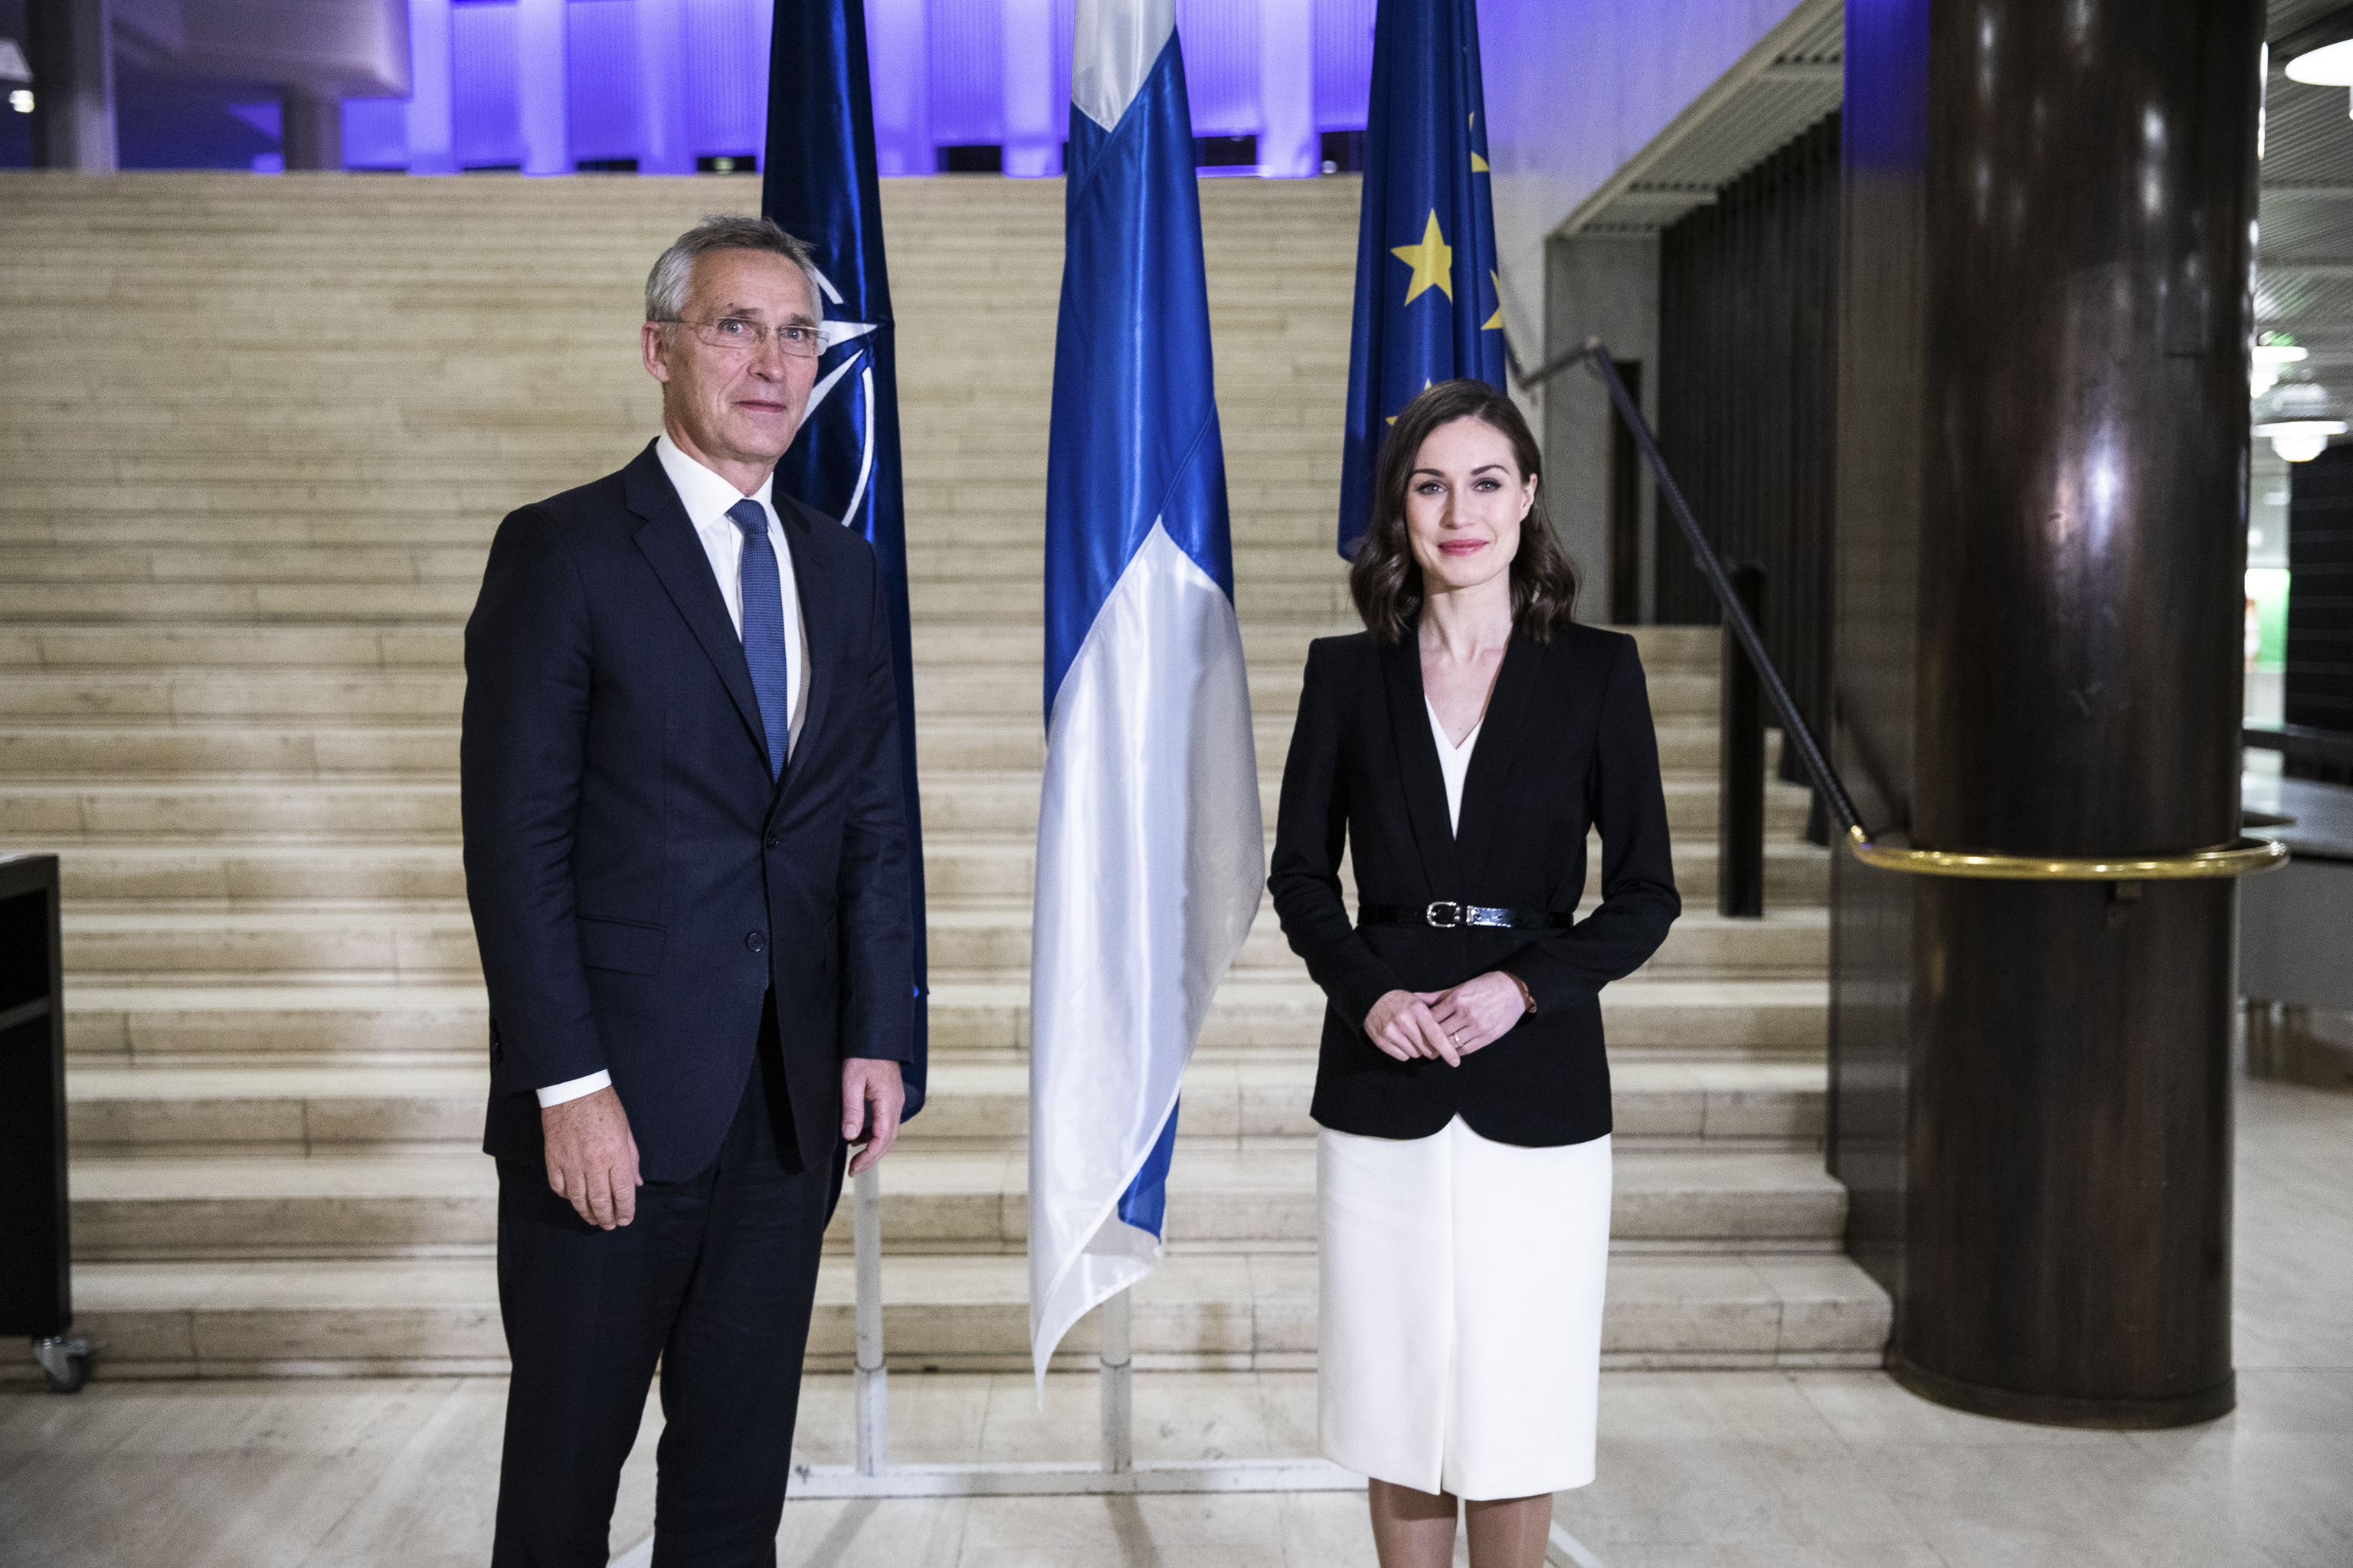 Finnish Prime Minister Sanna Marin and NATO Secretary General Jens Stoltenberg at a meeting